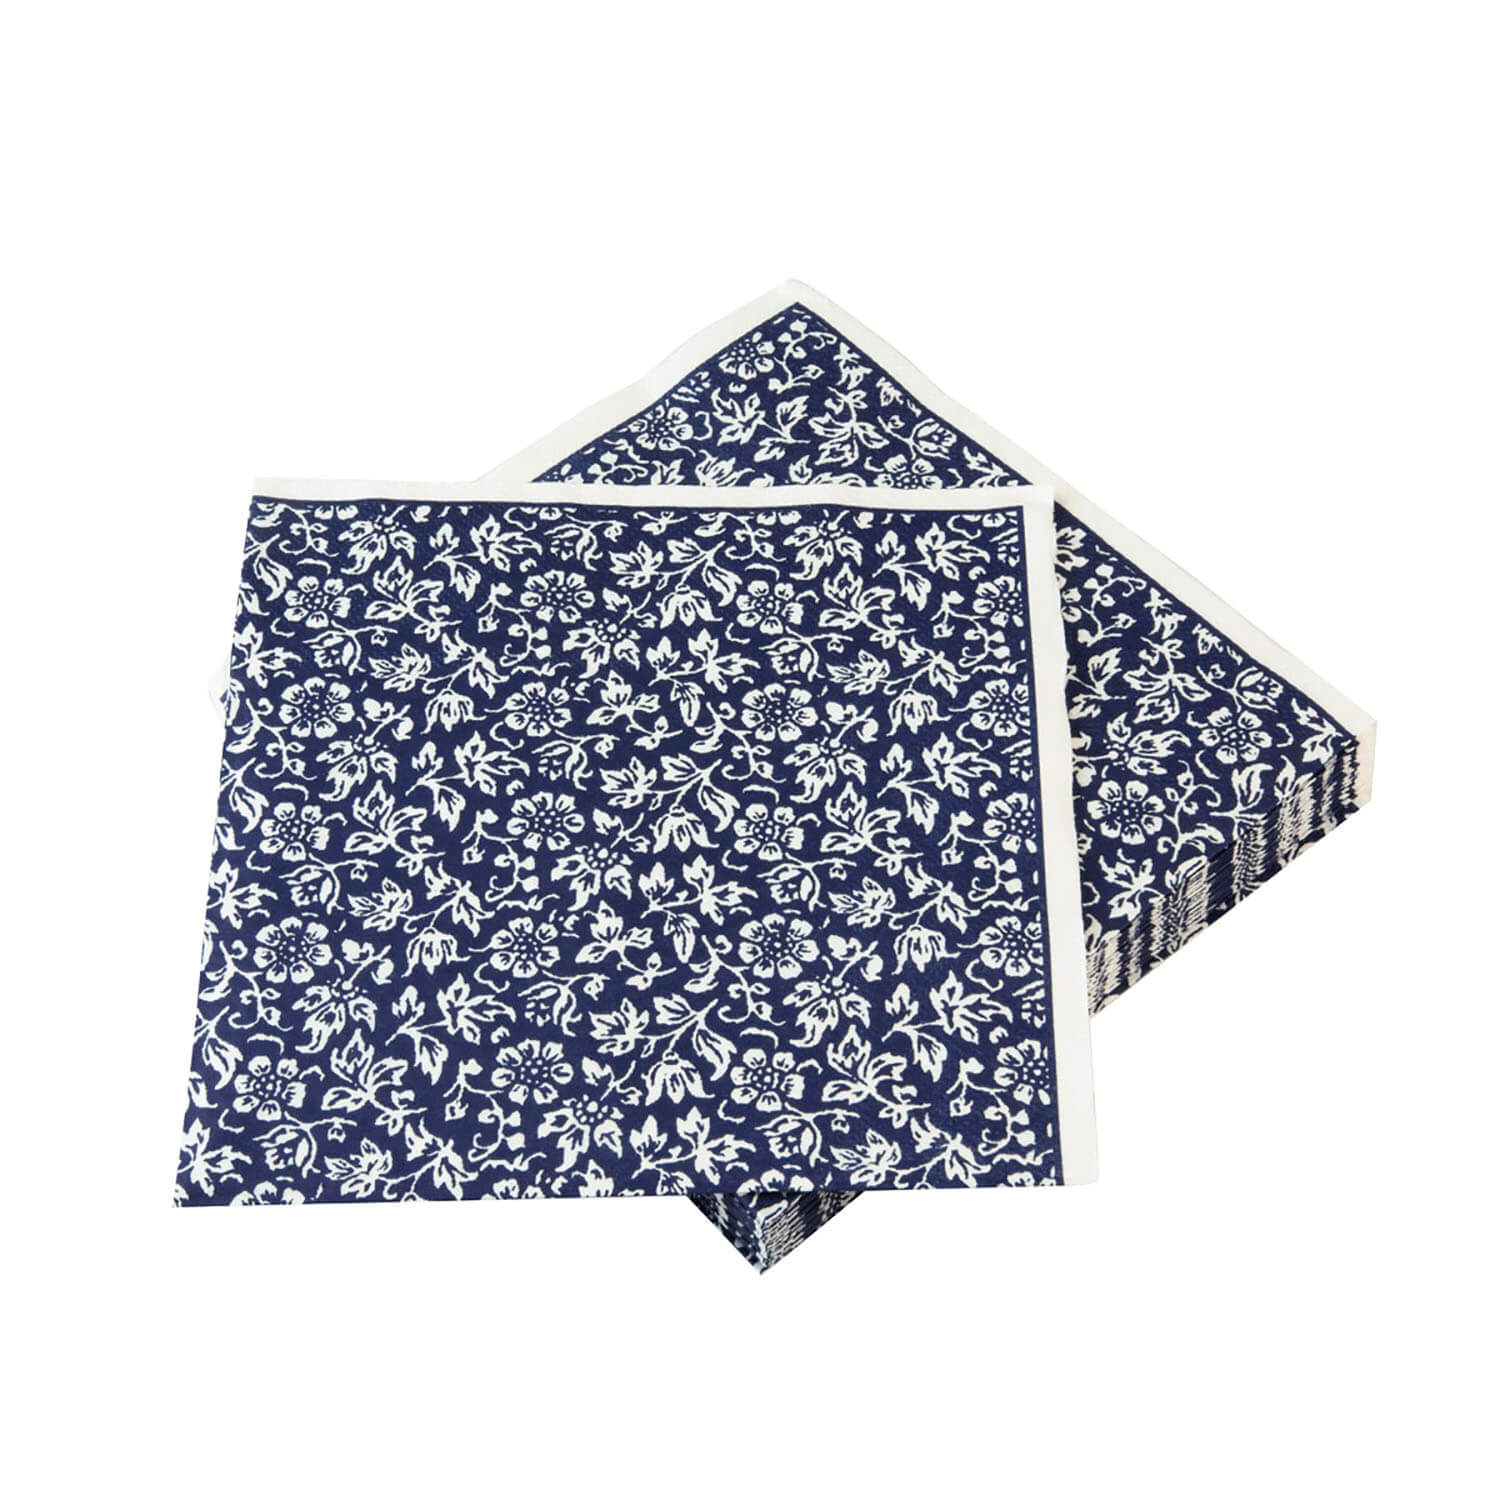 Laura Ashley Blueprint Collectables Set of 20 Napkins - Sweet Alyssum 1 Shaws Department Stores